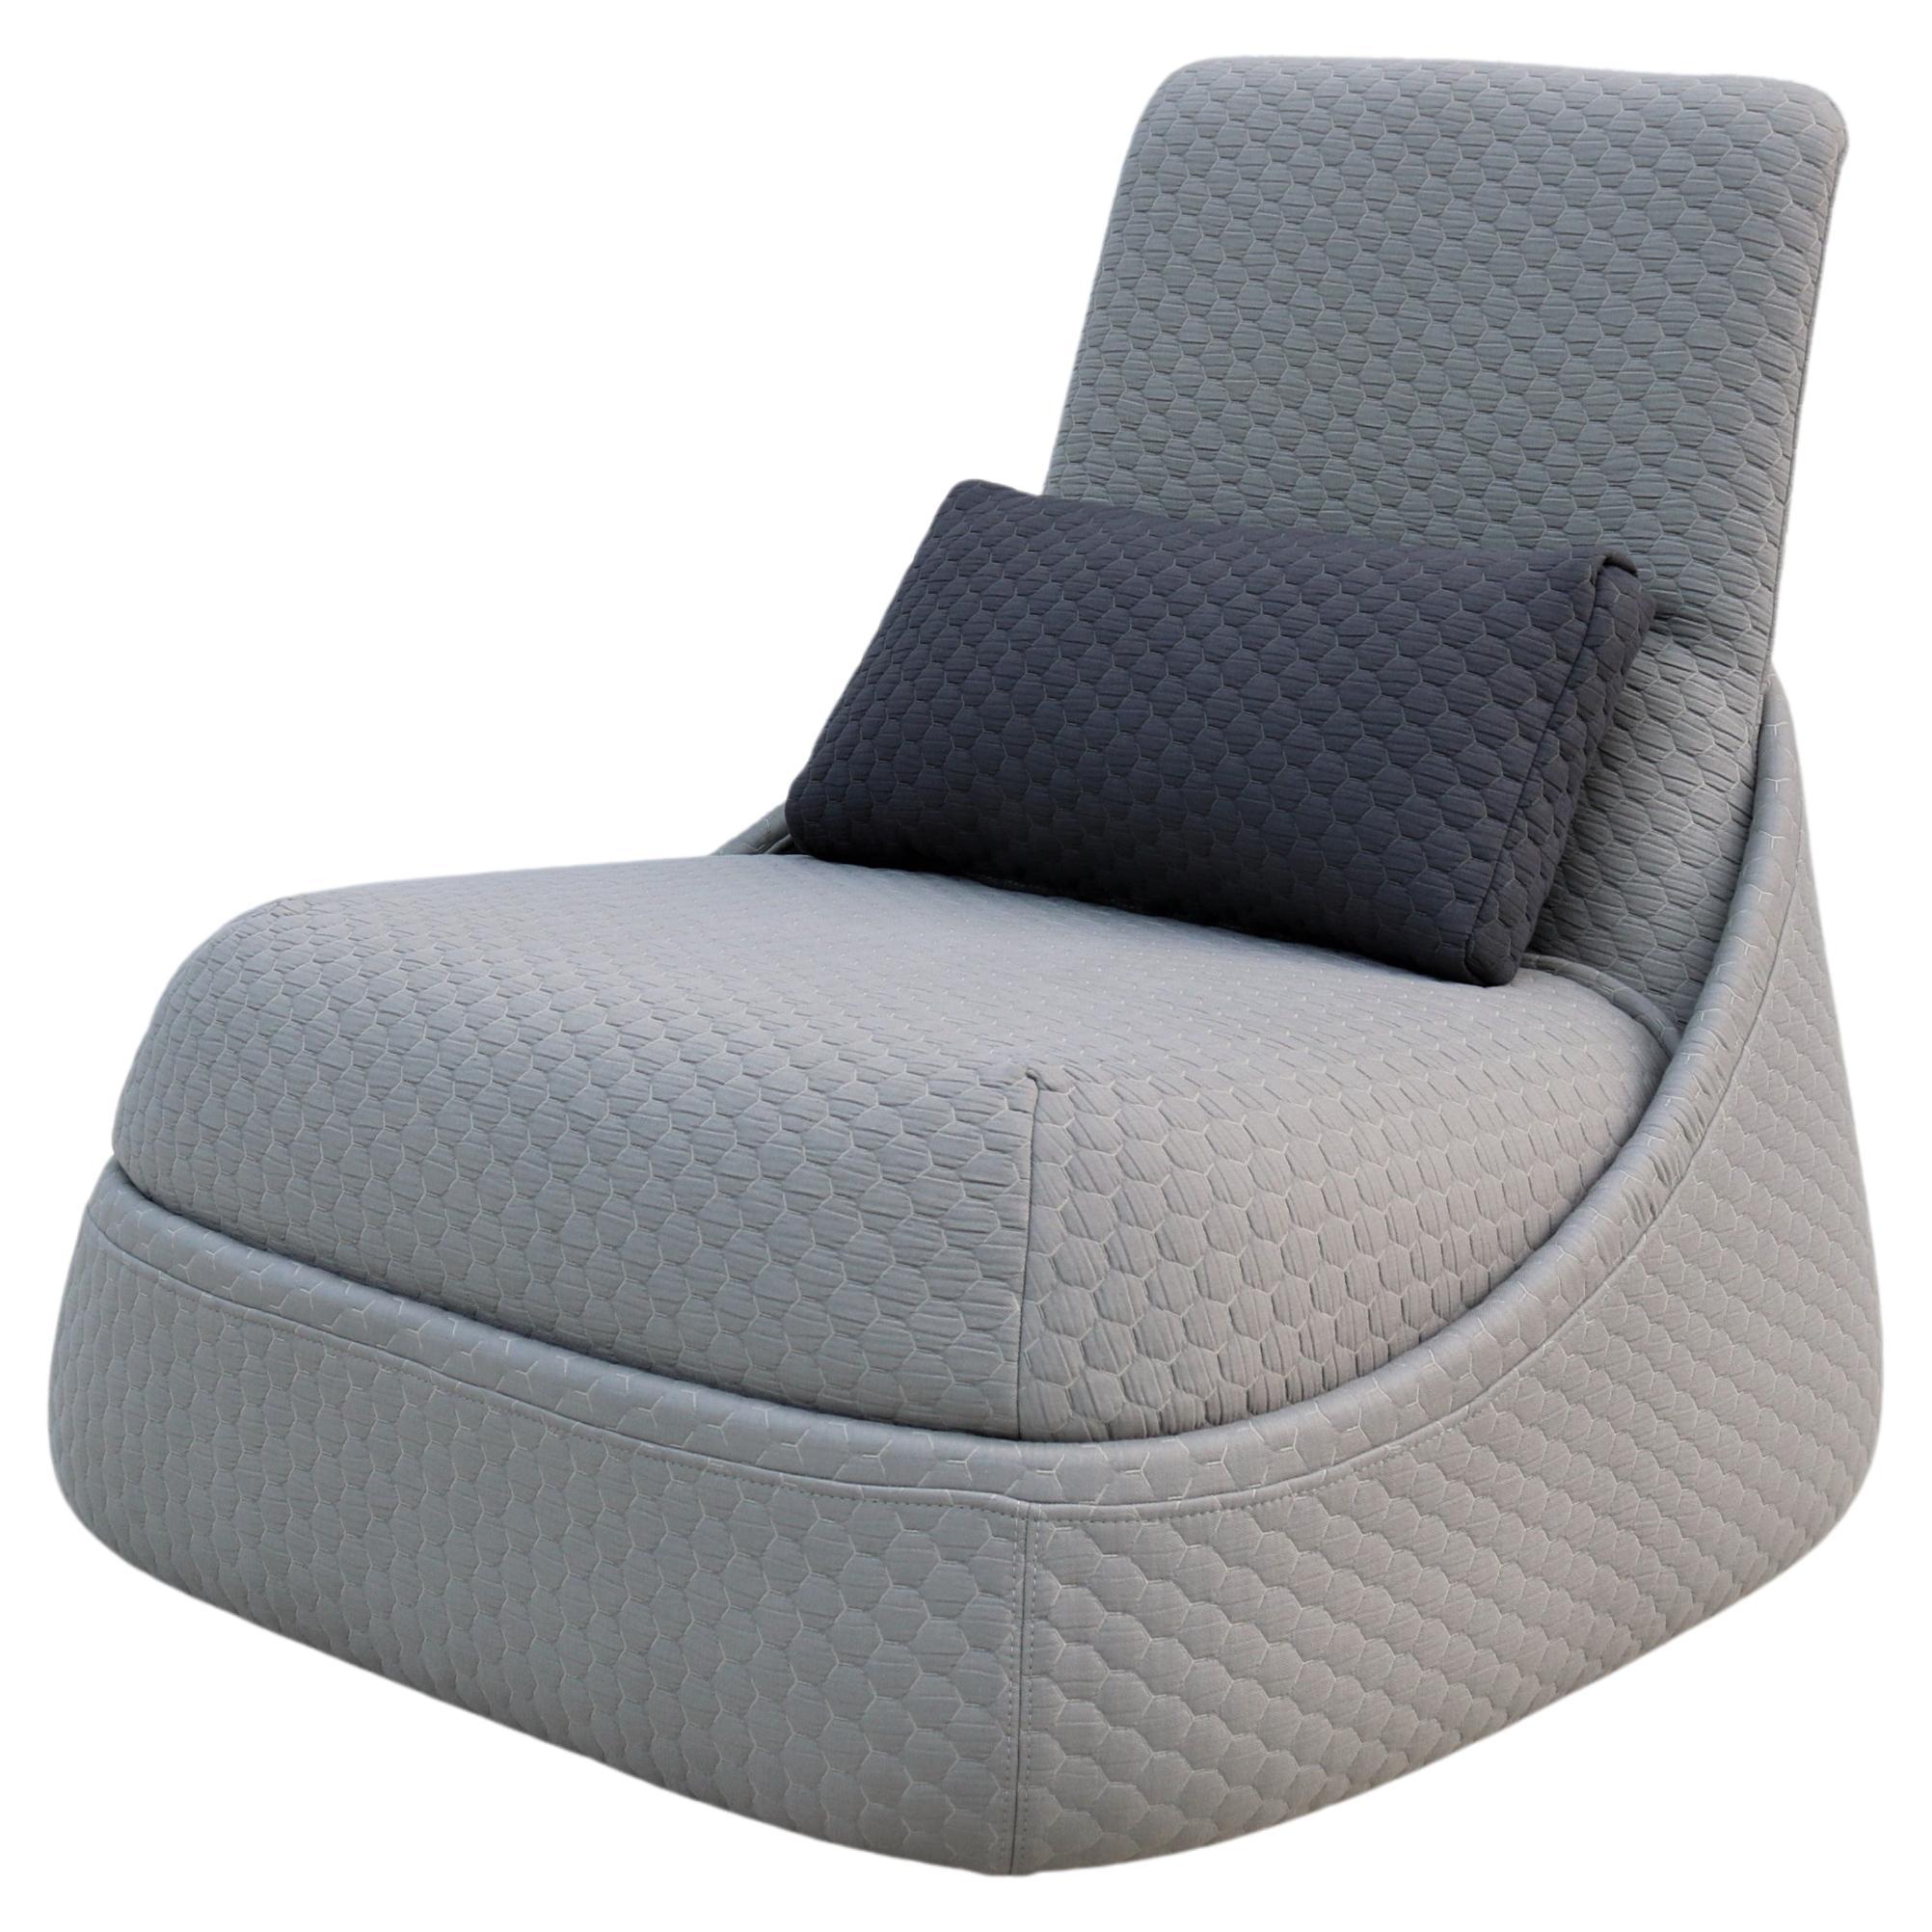 Modern Patricia Urquiola for Coalesse Hosu Chaise Lounge Chair with Ottoman